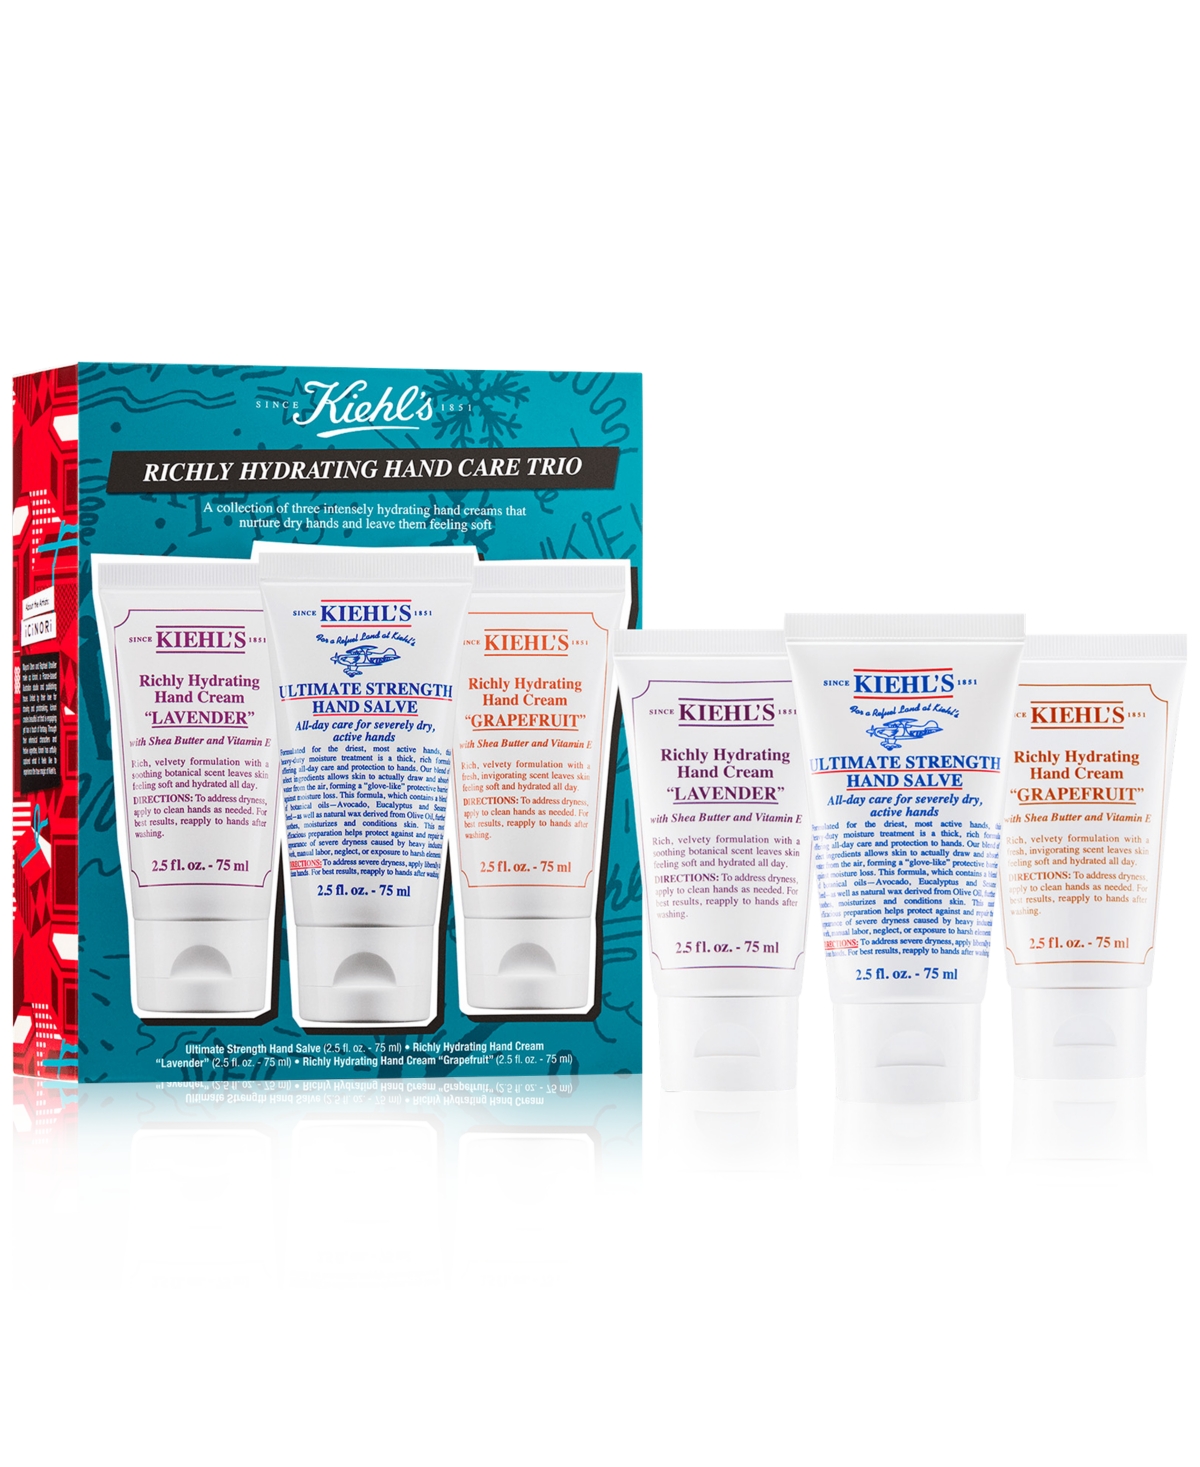 KIEHL'S SINCE 1851 3-PC. RICHLY HYDRATING HAND CARE SET